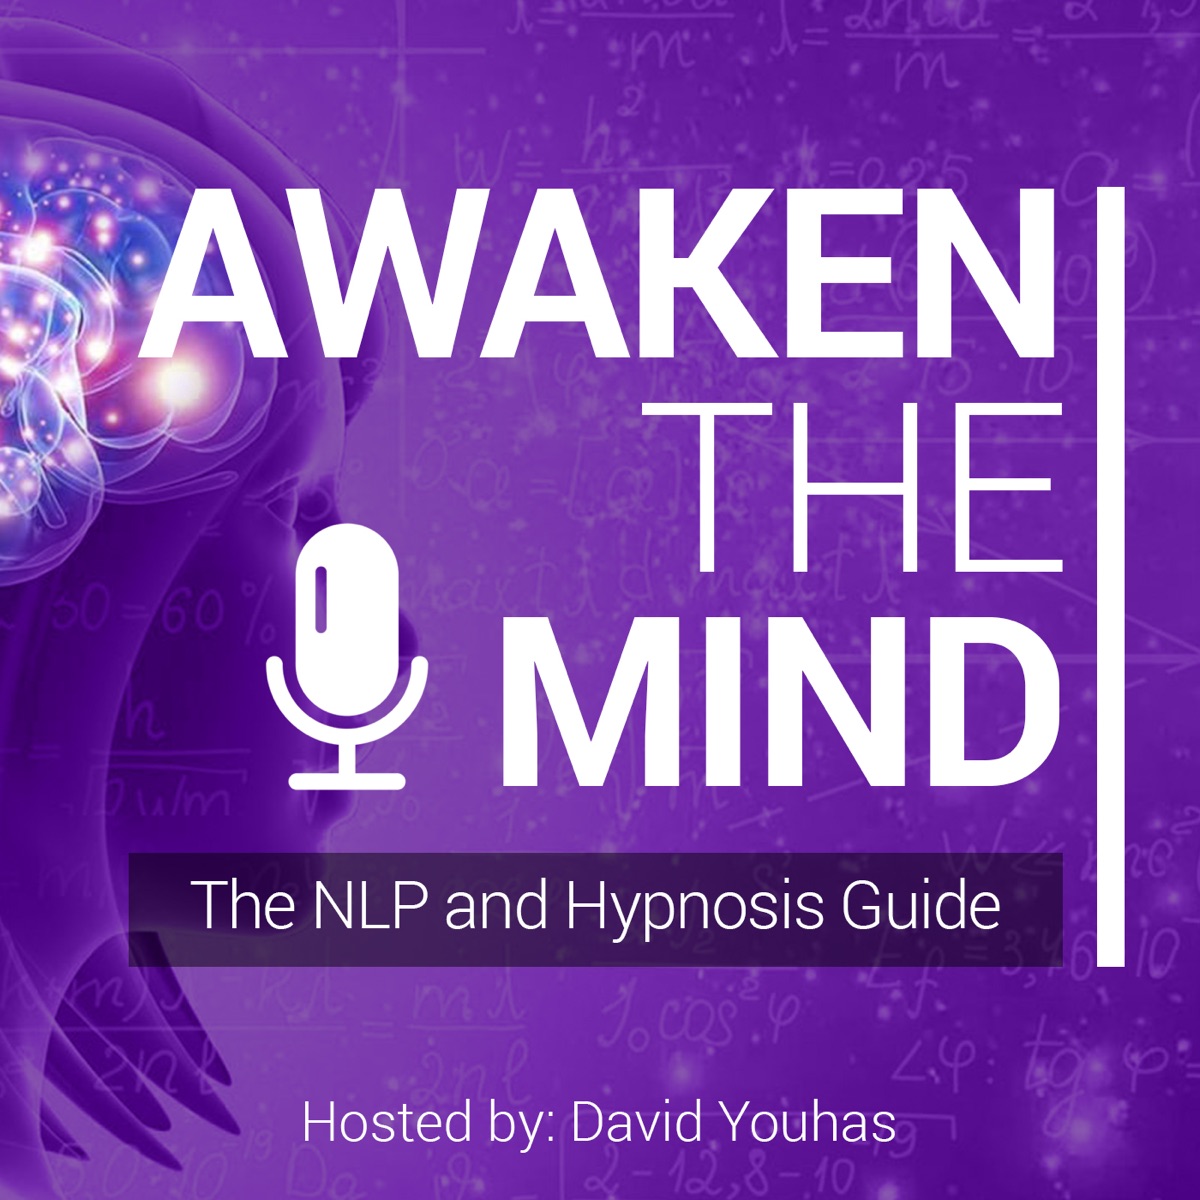 The NLP & Hypnosis Guide